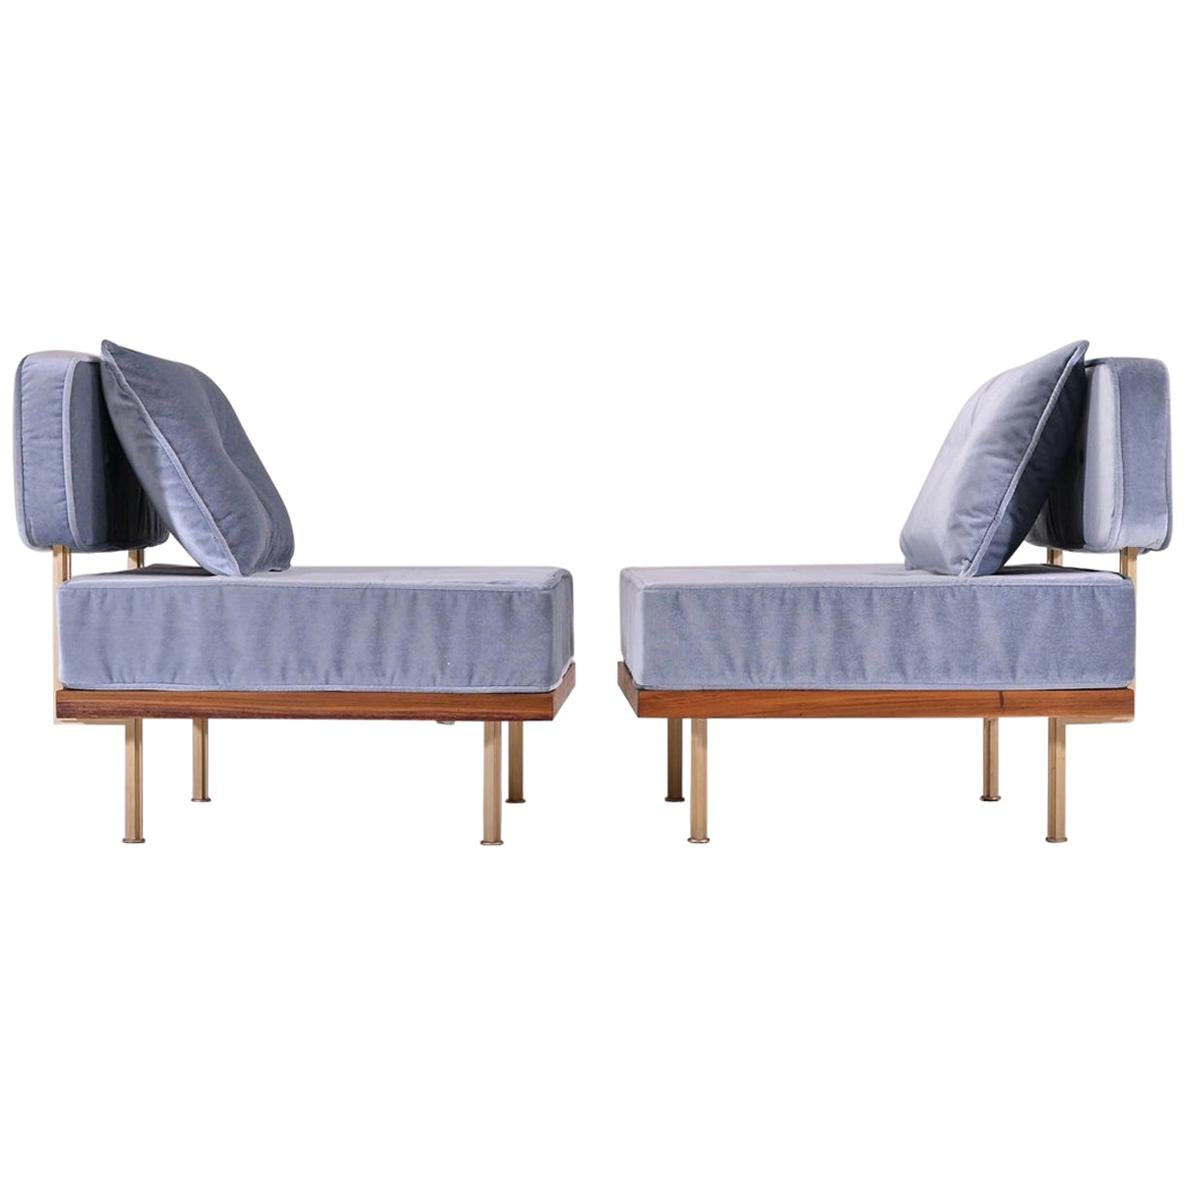 Set of Two Bespoke Lounge Chair, Reclaimed Hardwood and Brass by P. Tendercool For Sale